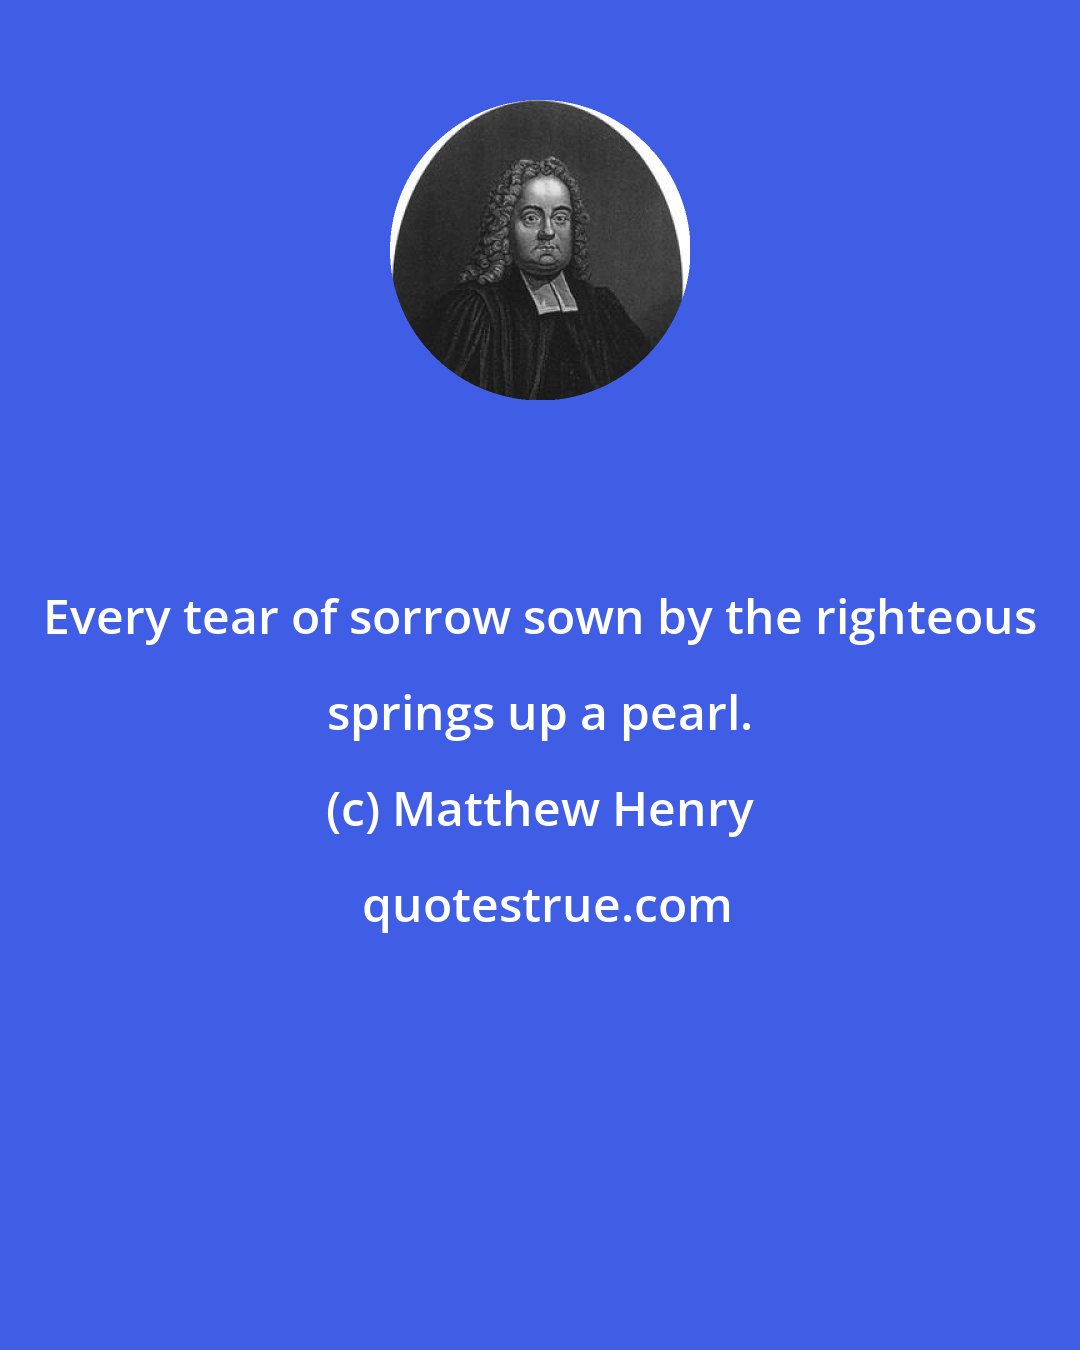 Matthew Henry: Every tear of sorrow sown by the righteous springs up a pearl.